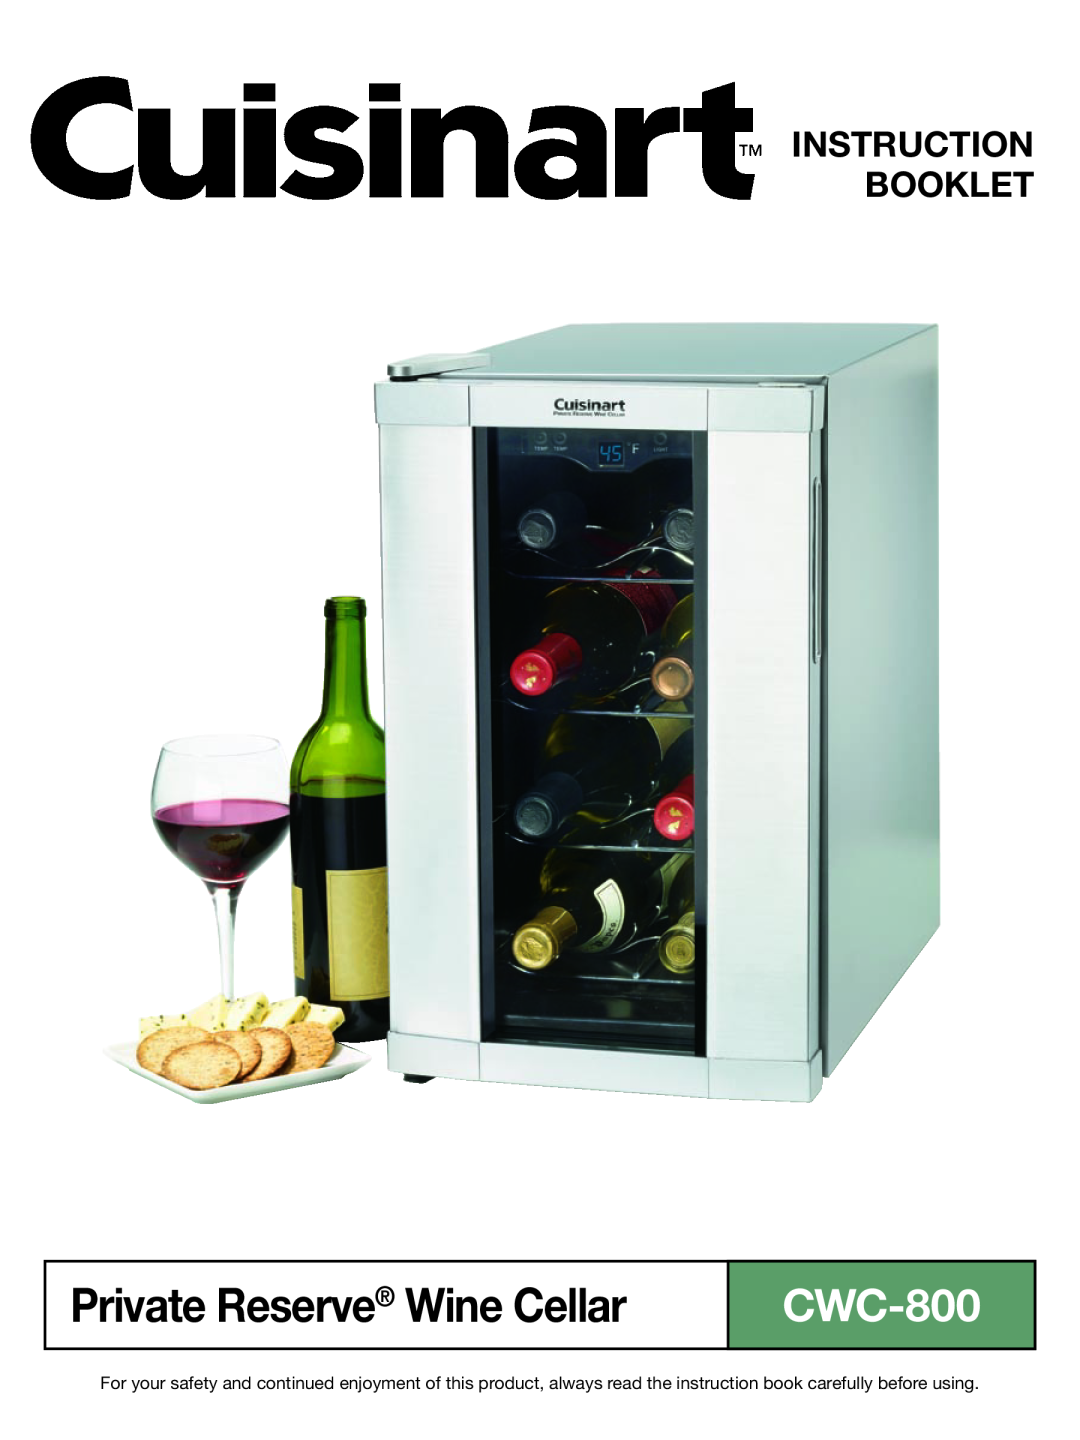 Cuisinart CWC-800 manual Private Reserve Wine Cellar, Instruction Booklet 